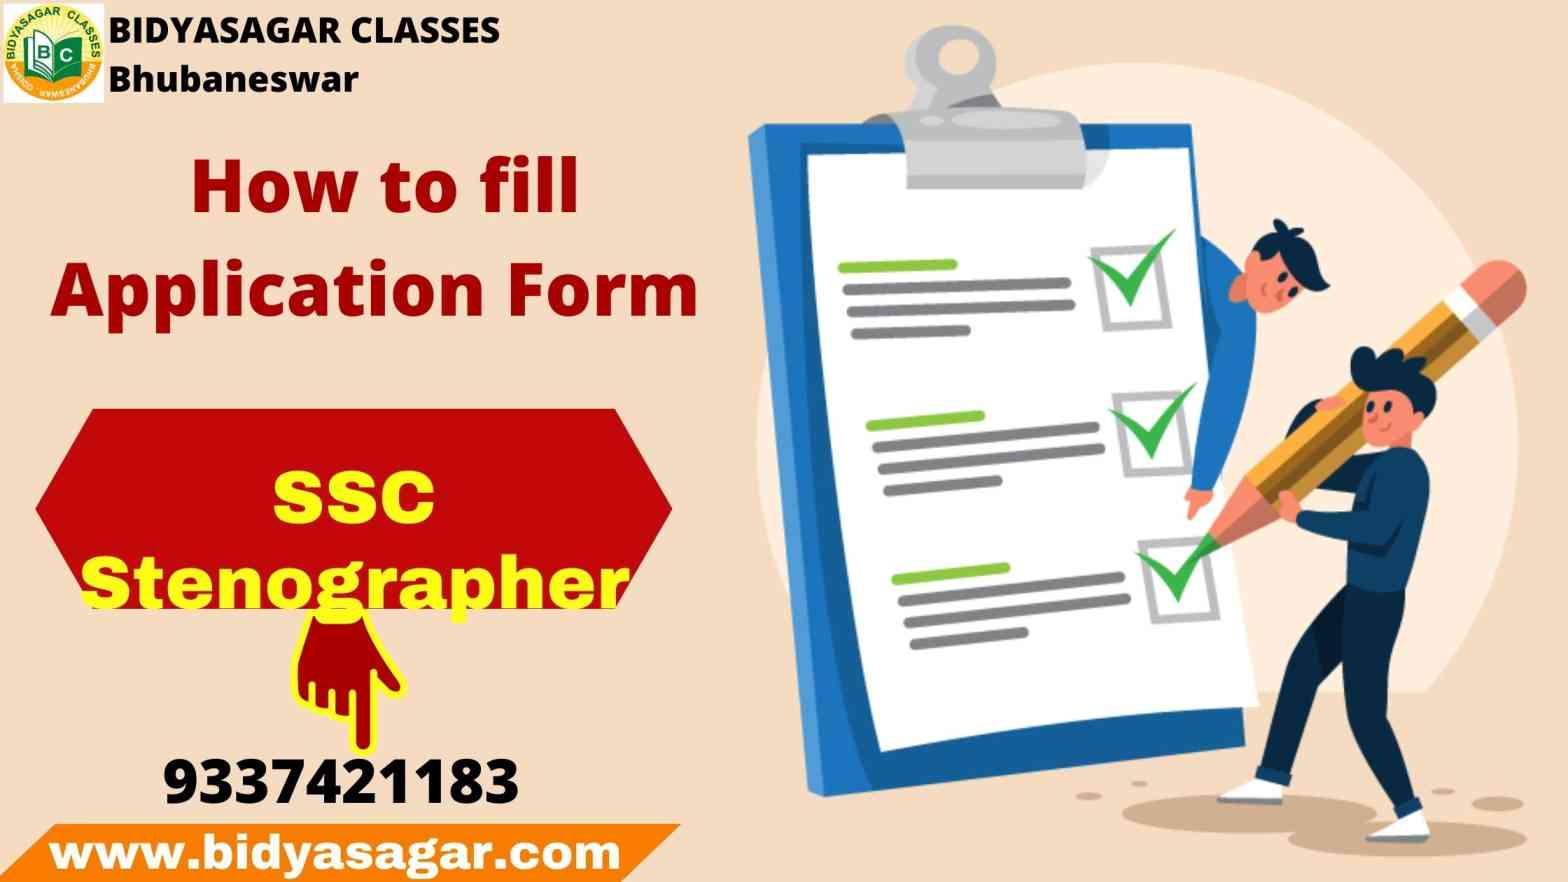 How to Fill SSC Stenographer Application Form 2020-21?